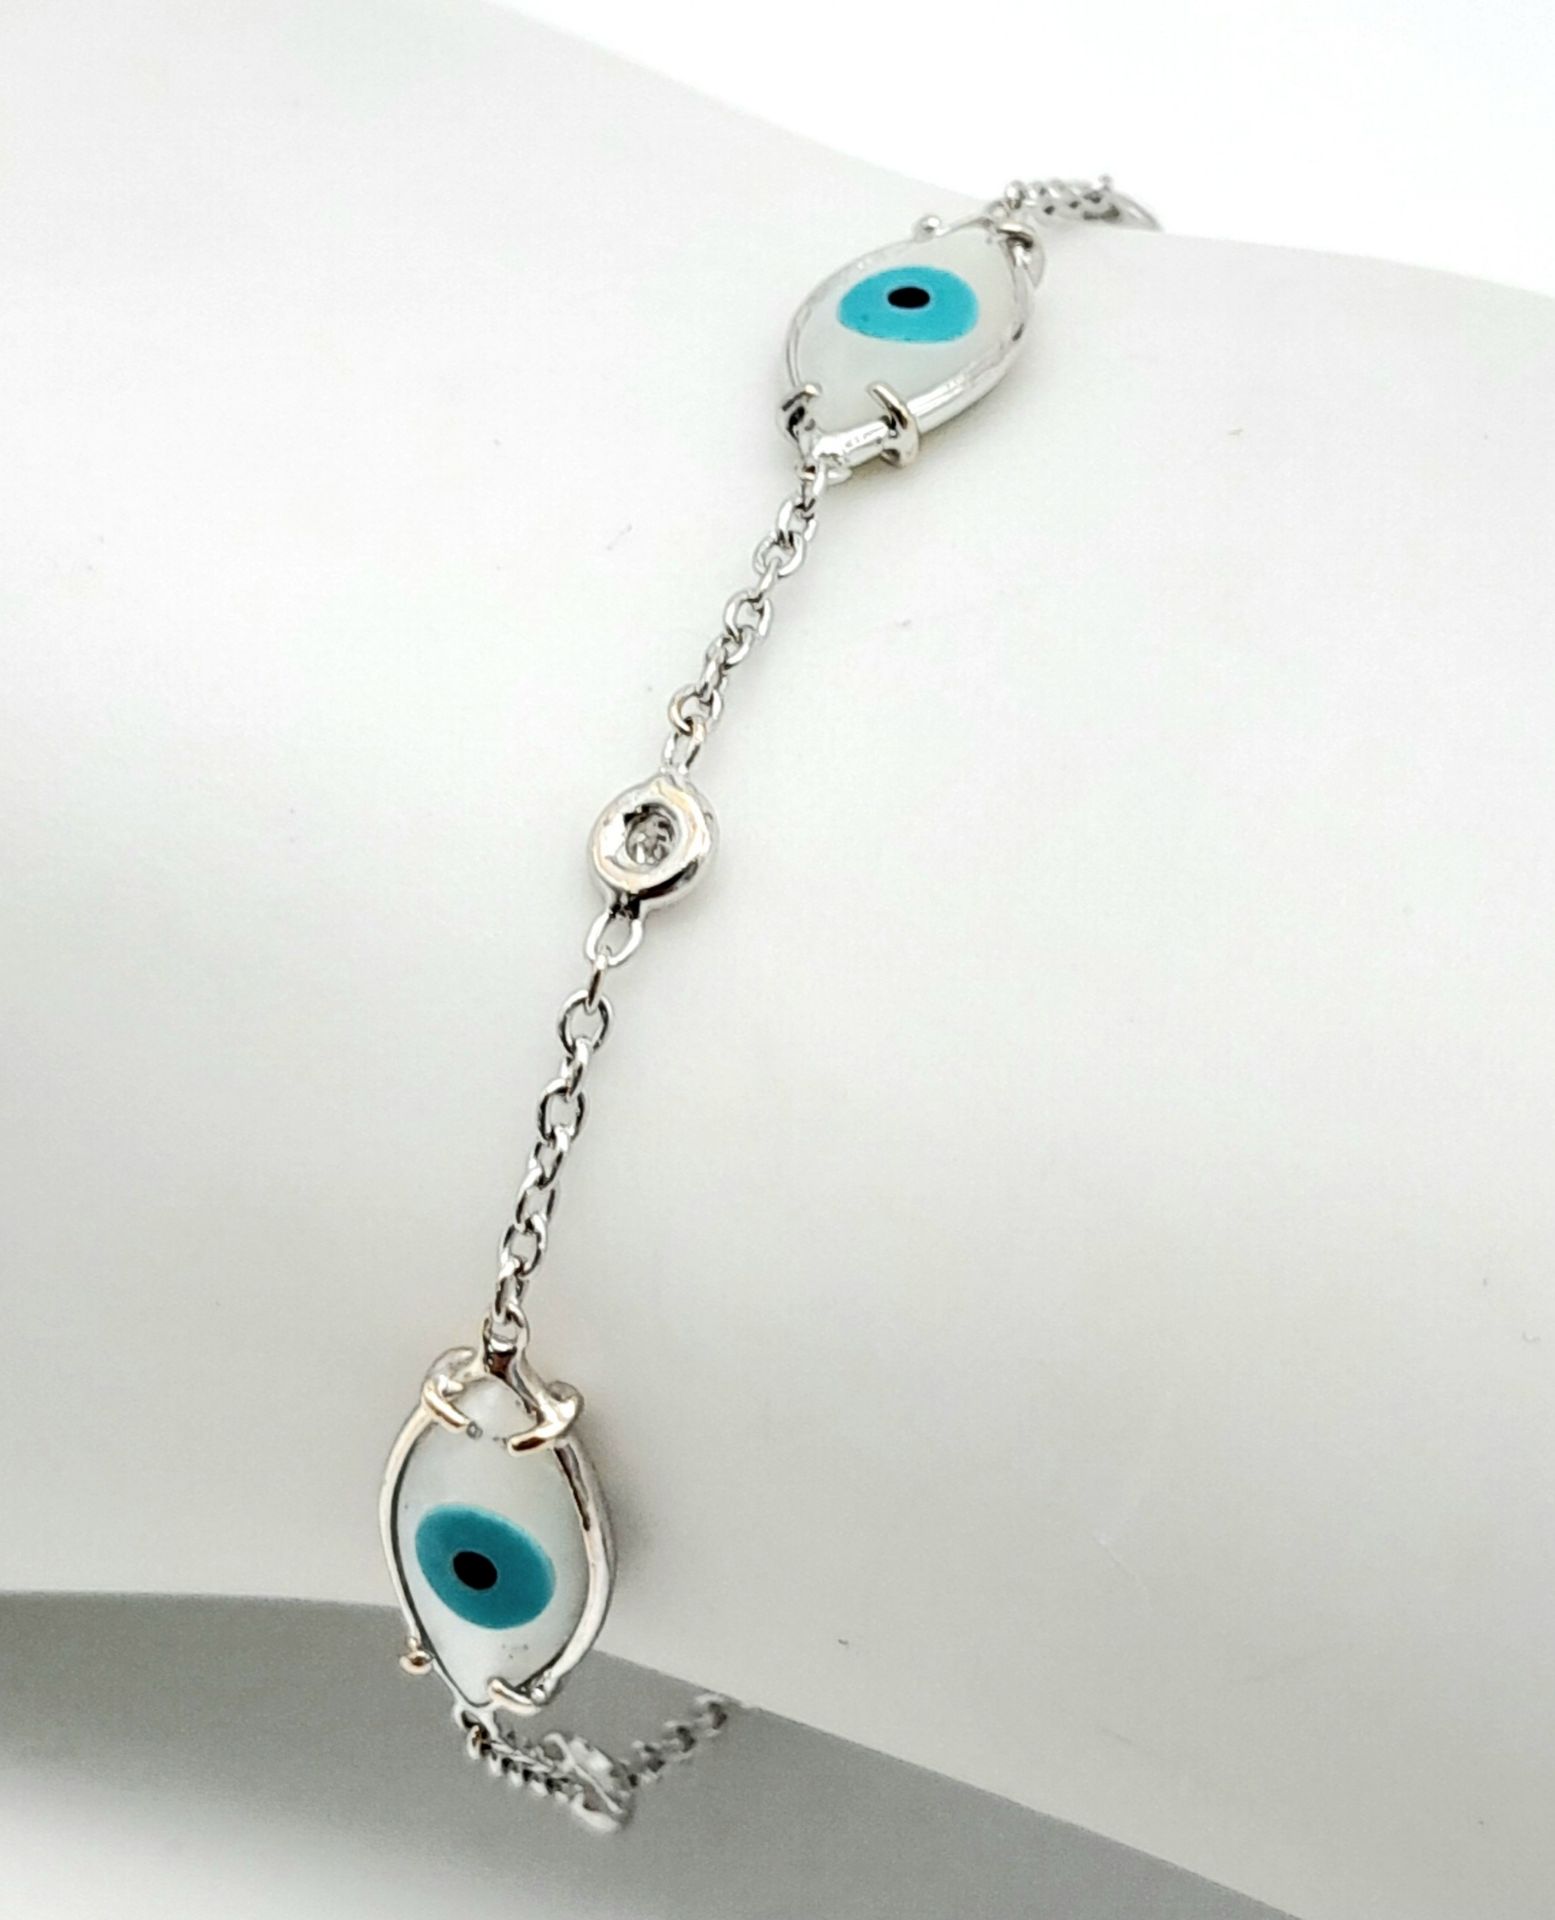 An 18K White Gold Delicate Evil Eye and Diamond Bracelet. 17cm. 3g total weight. Ref: 016673 - Image 3 of 4